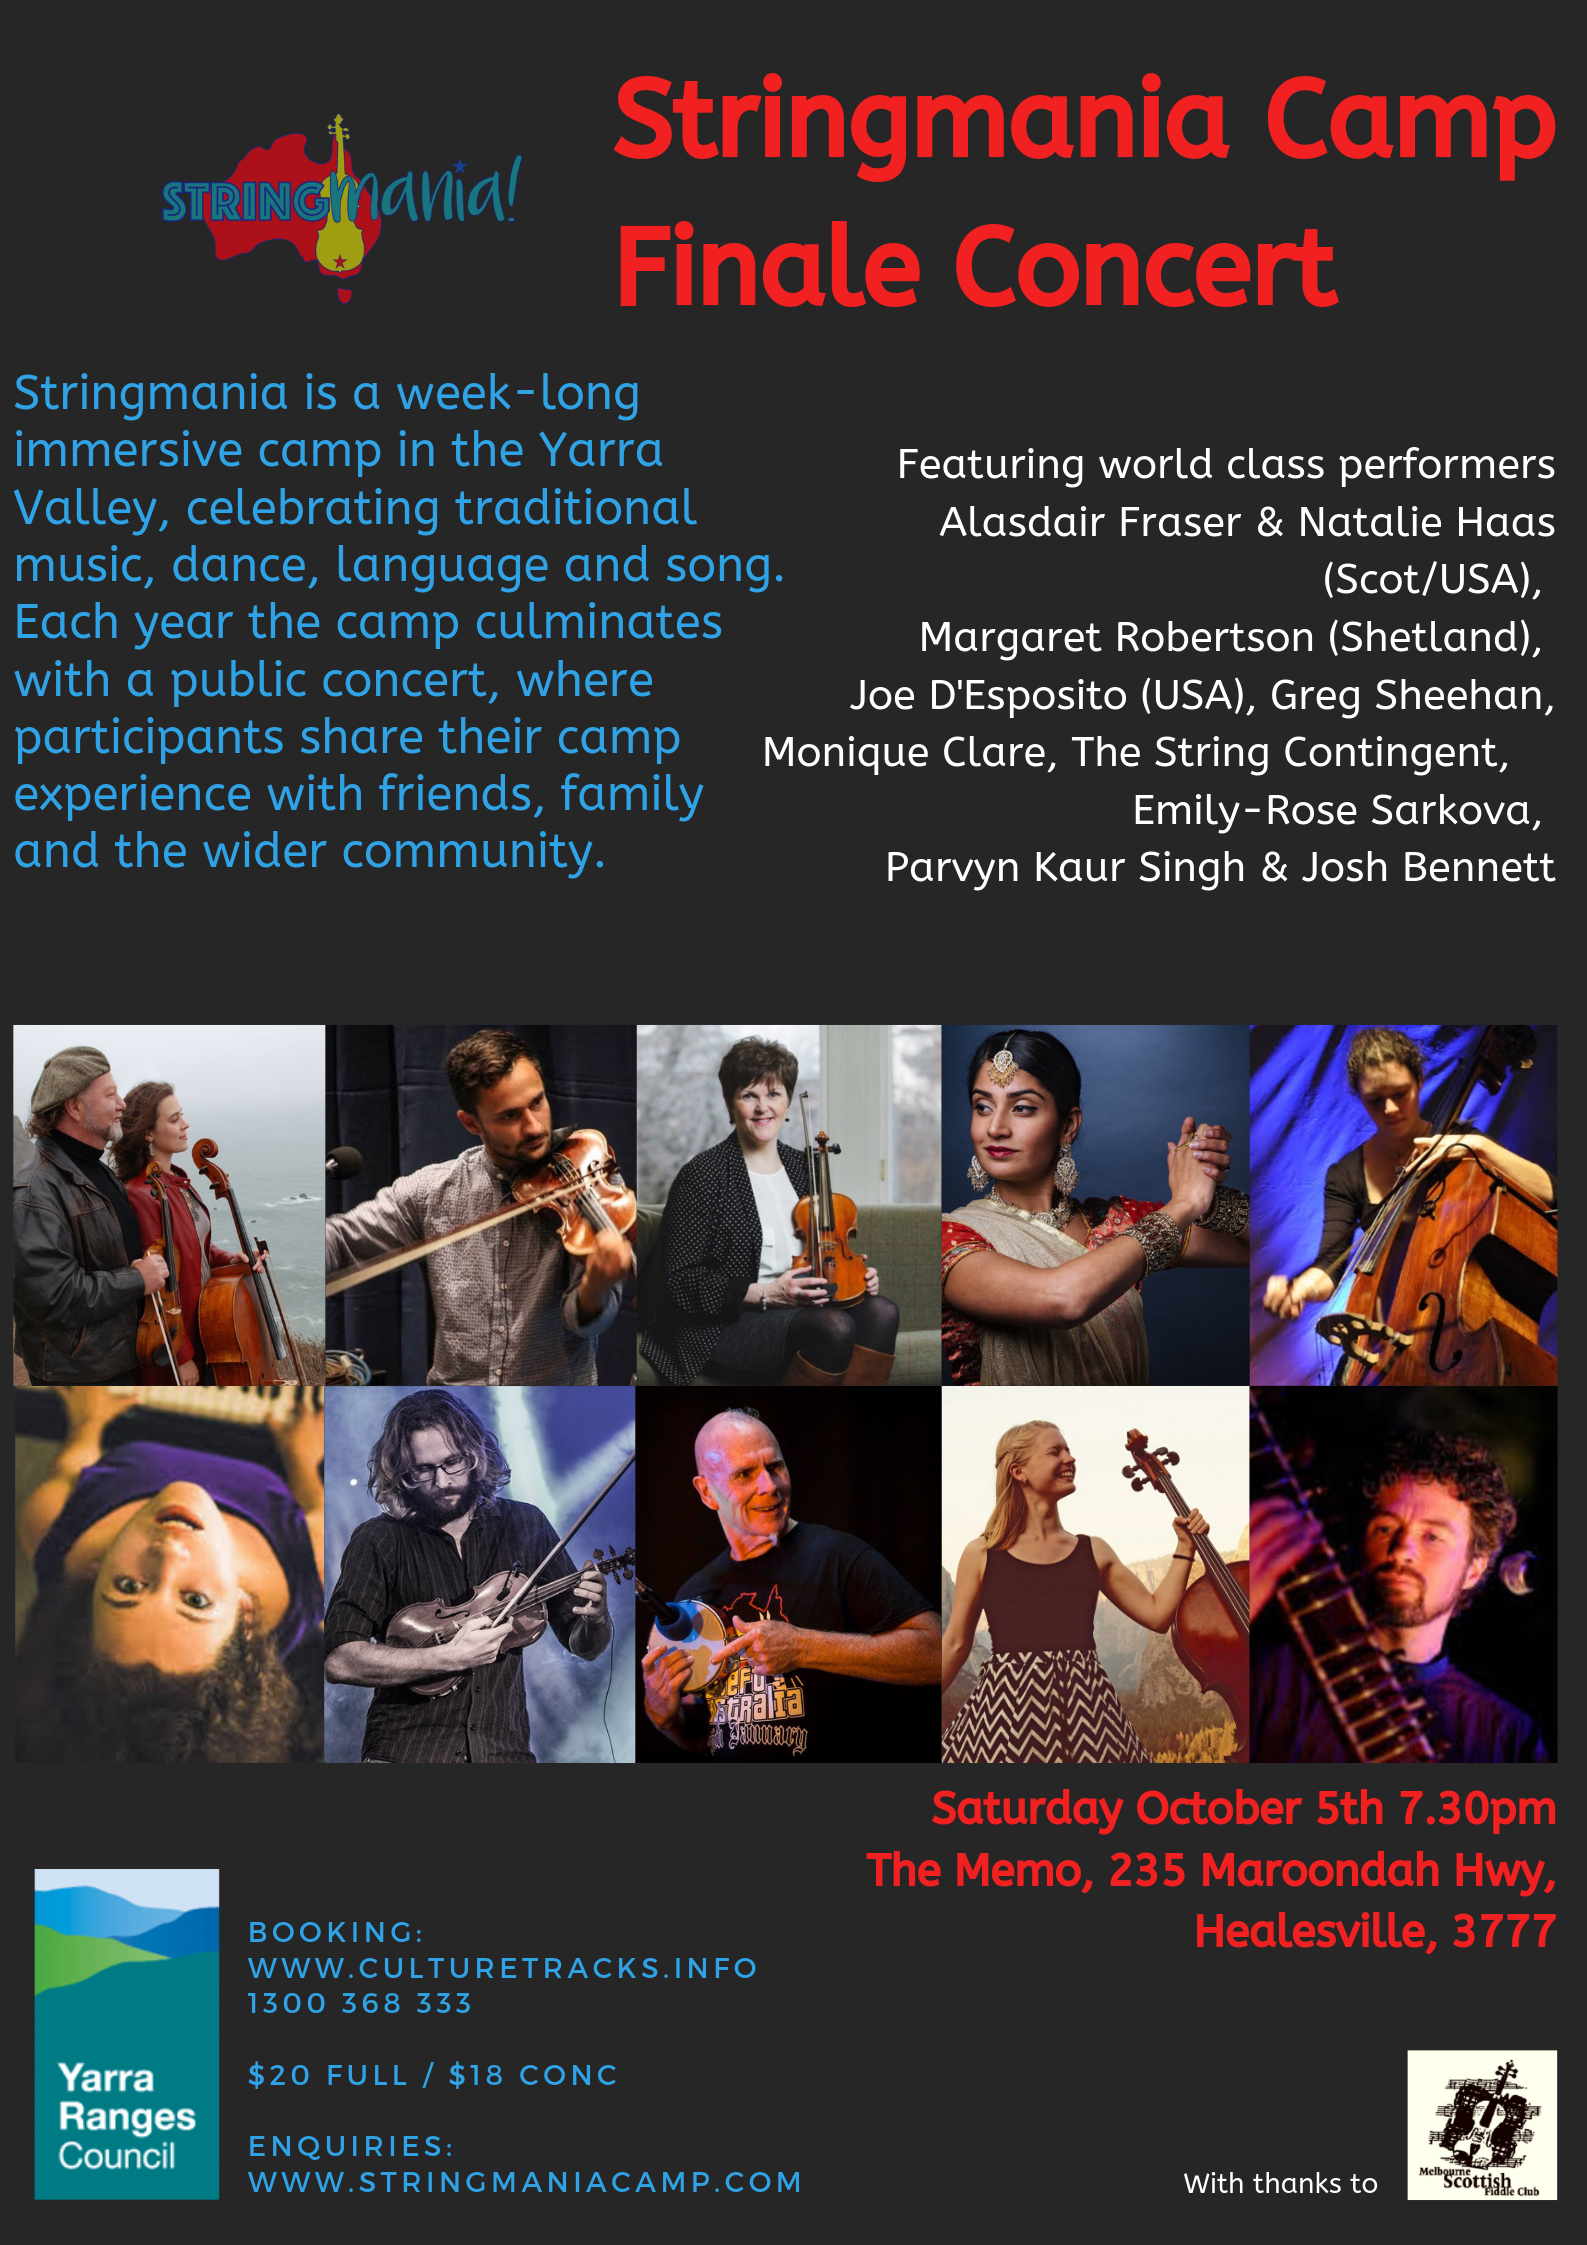 Get your tix for the all-star Stringmania concert in Healesville Oct 5